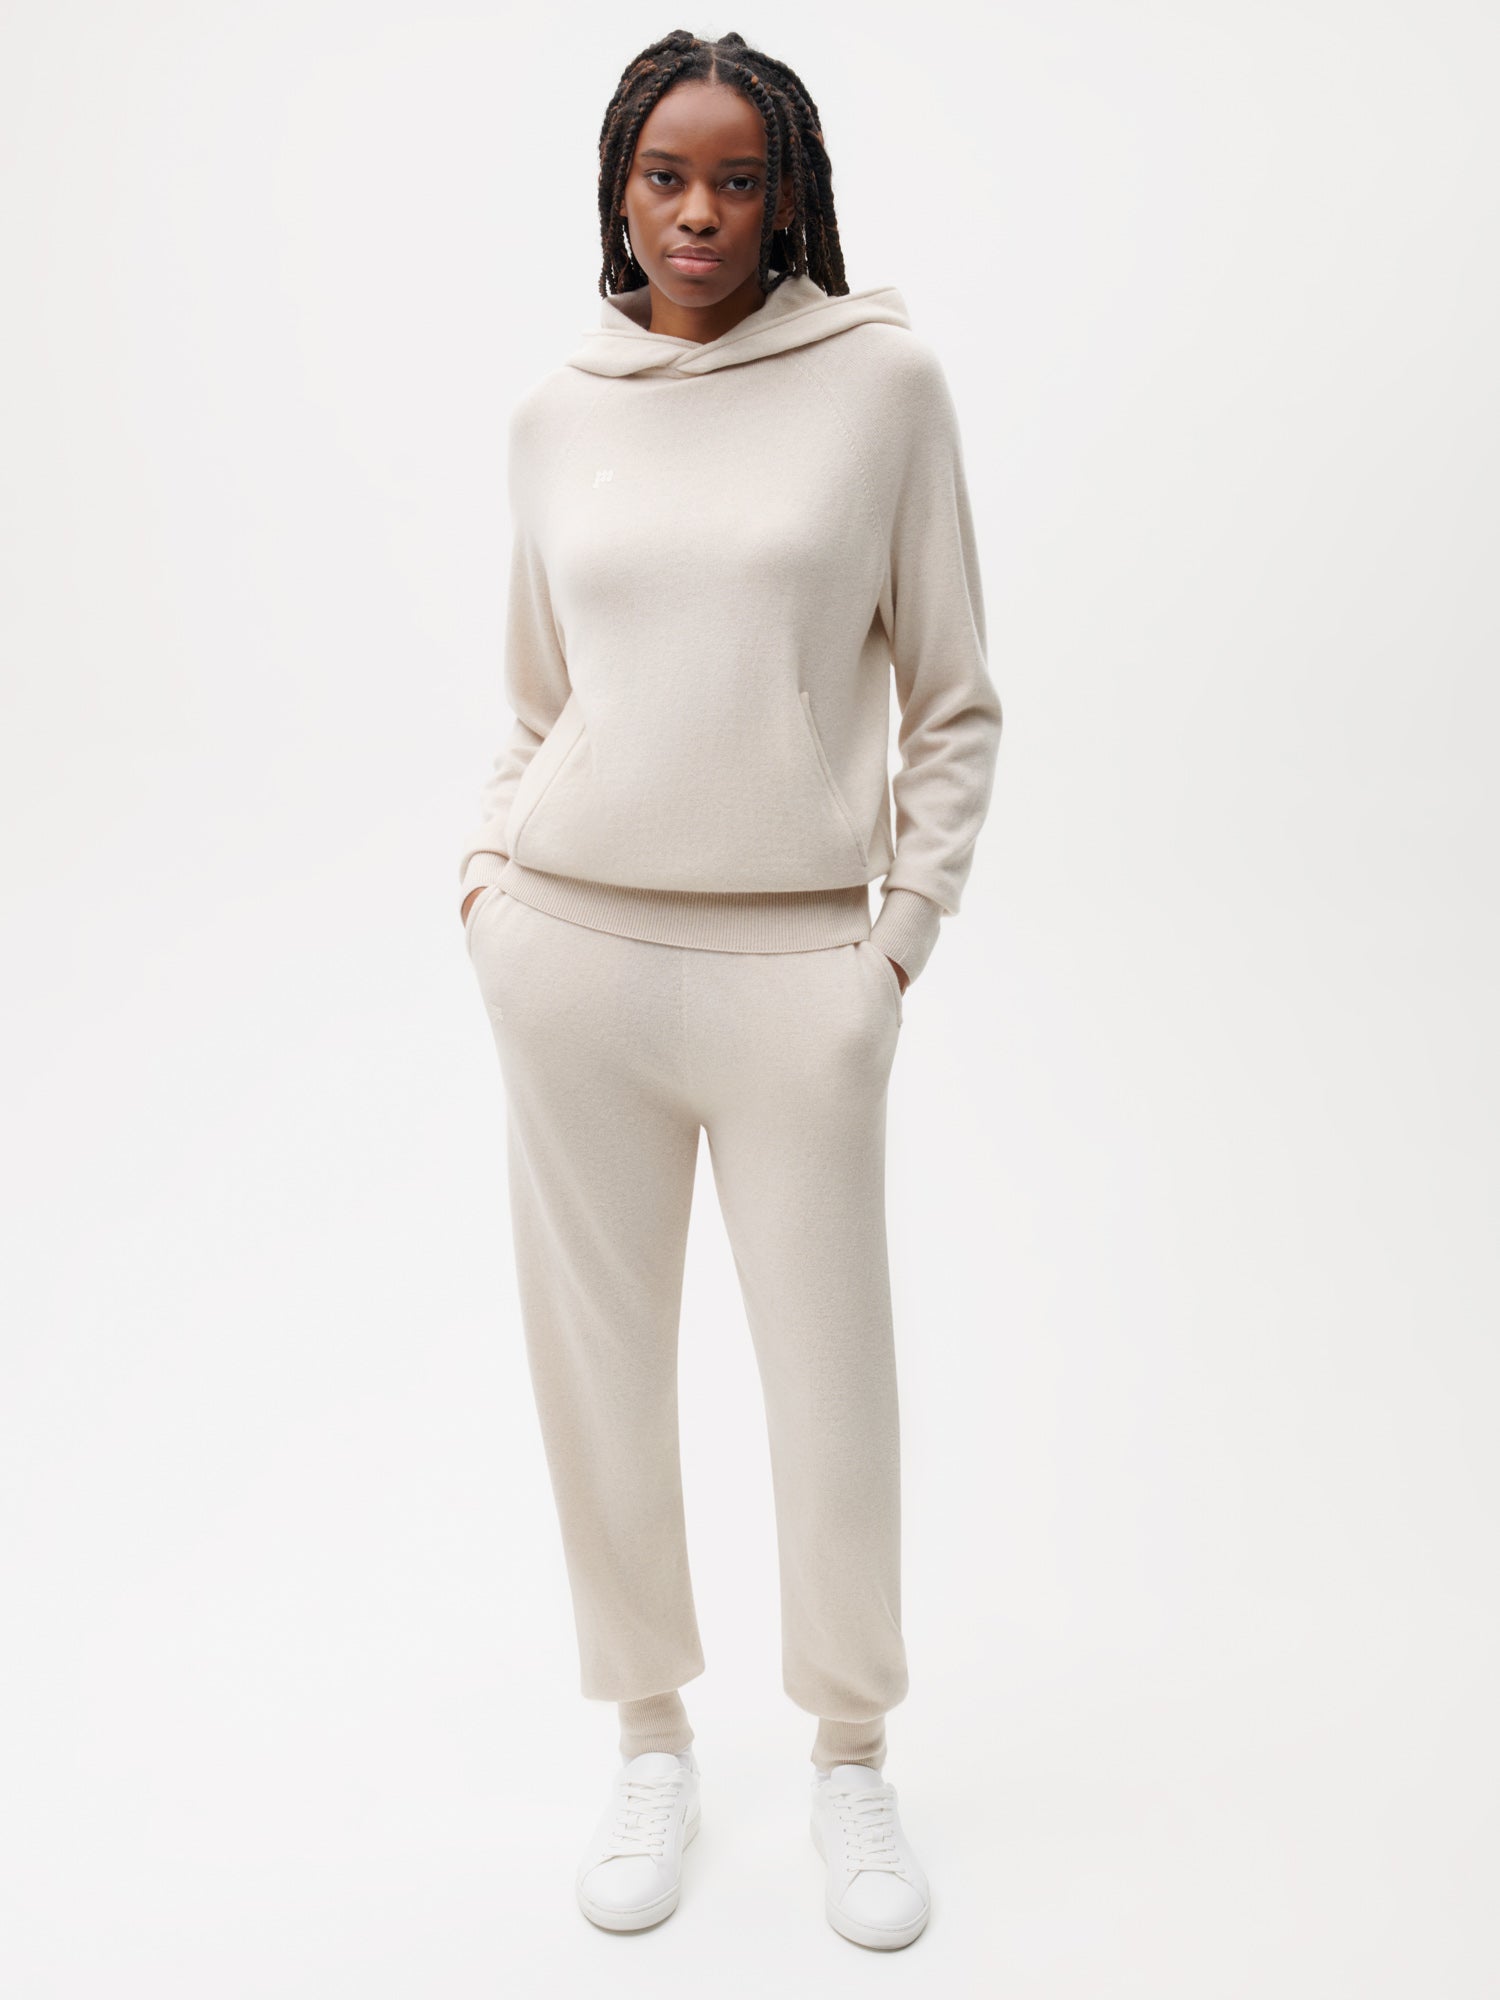 Cashmere Tracksuits & Sets for Women for sale